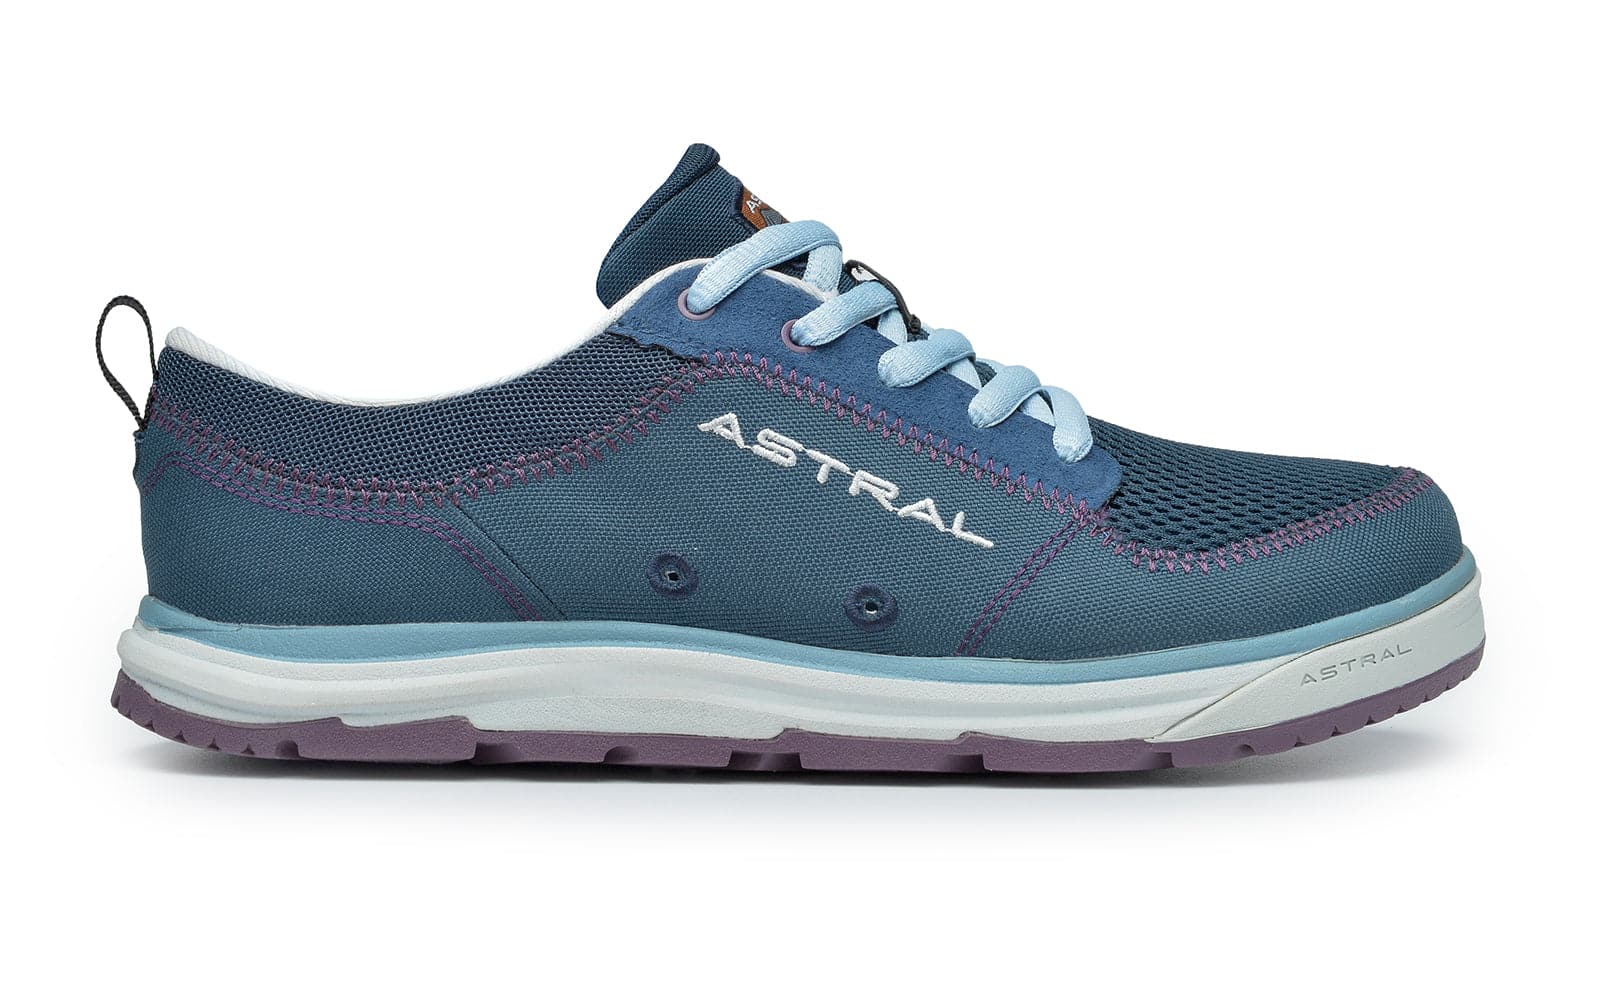 Featuring the Brewess 2.0 - Women's watersports, women's footwear manufactured by Astral shown here from a ninth angle.